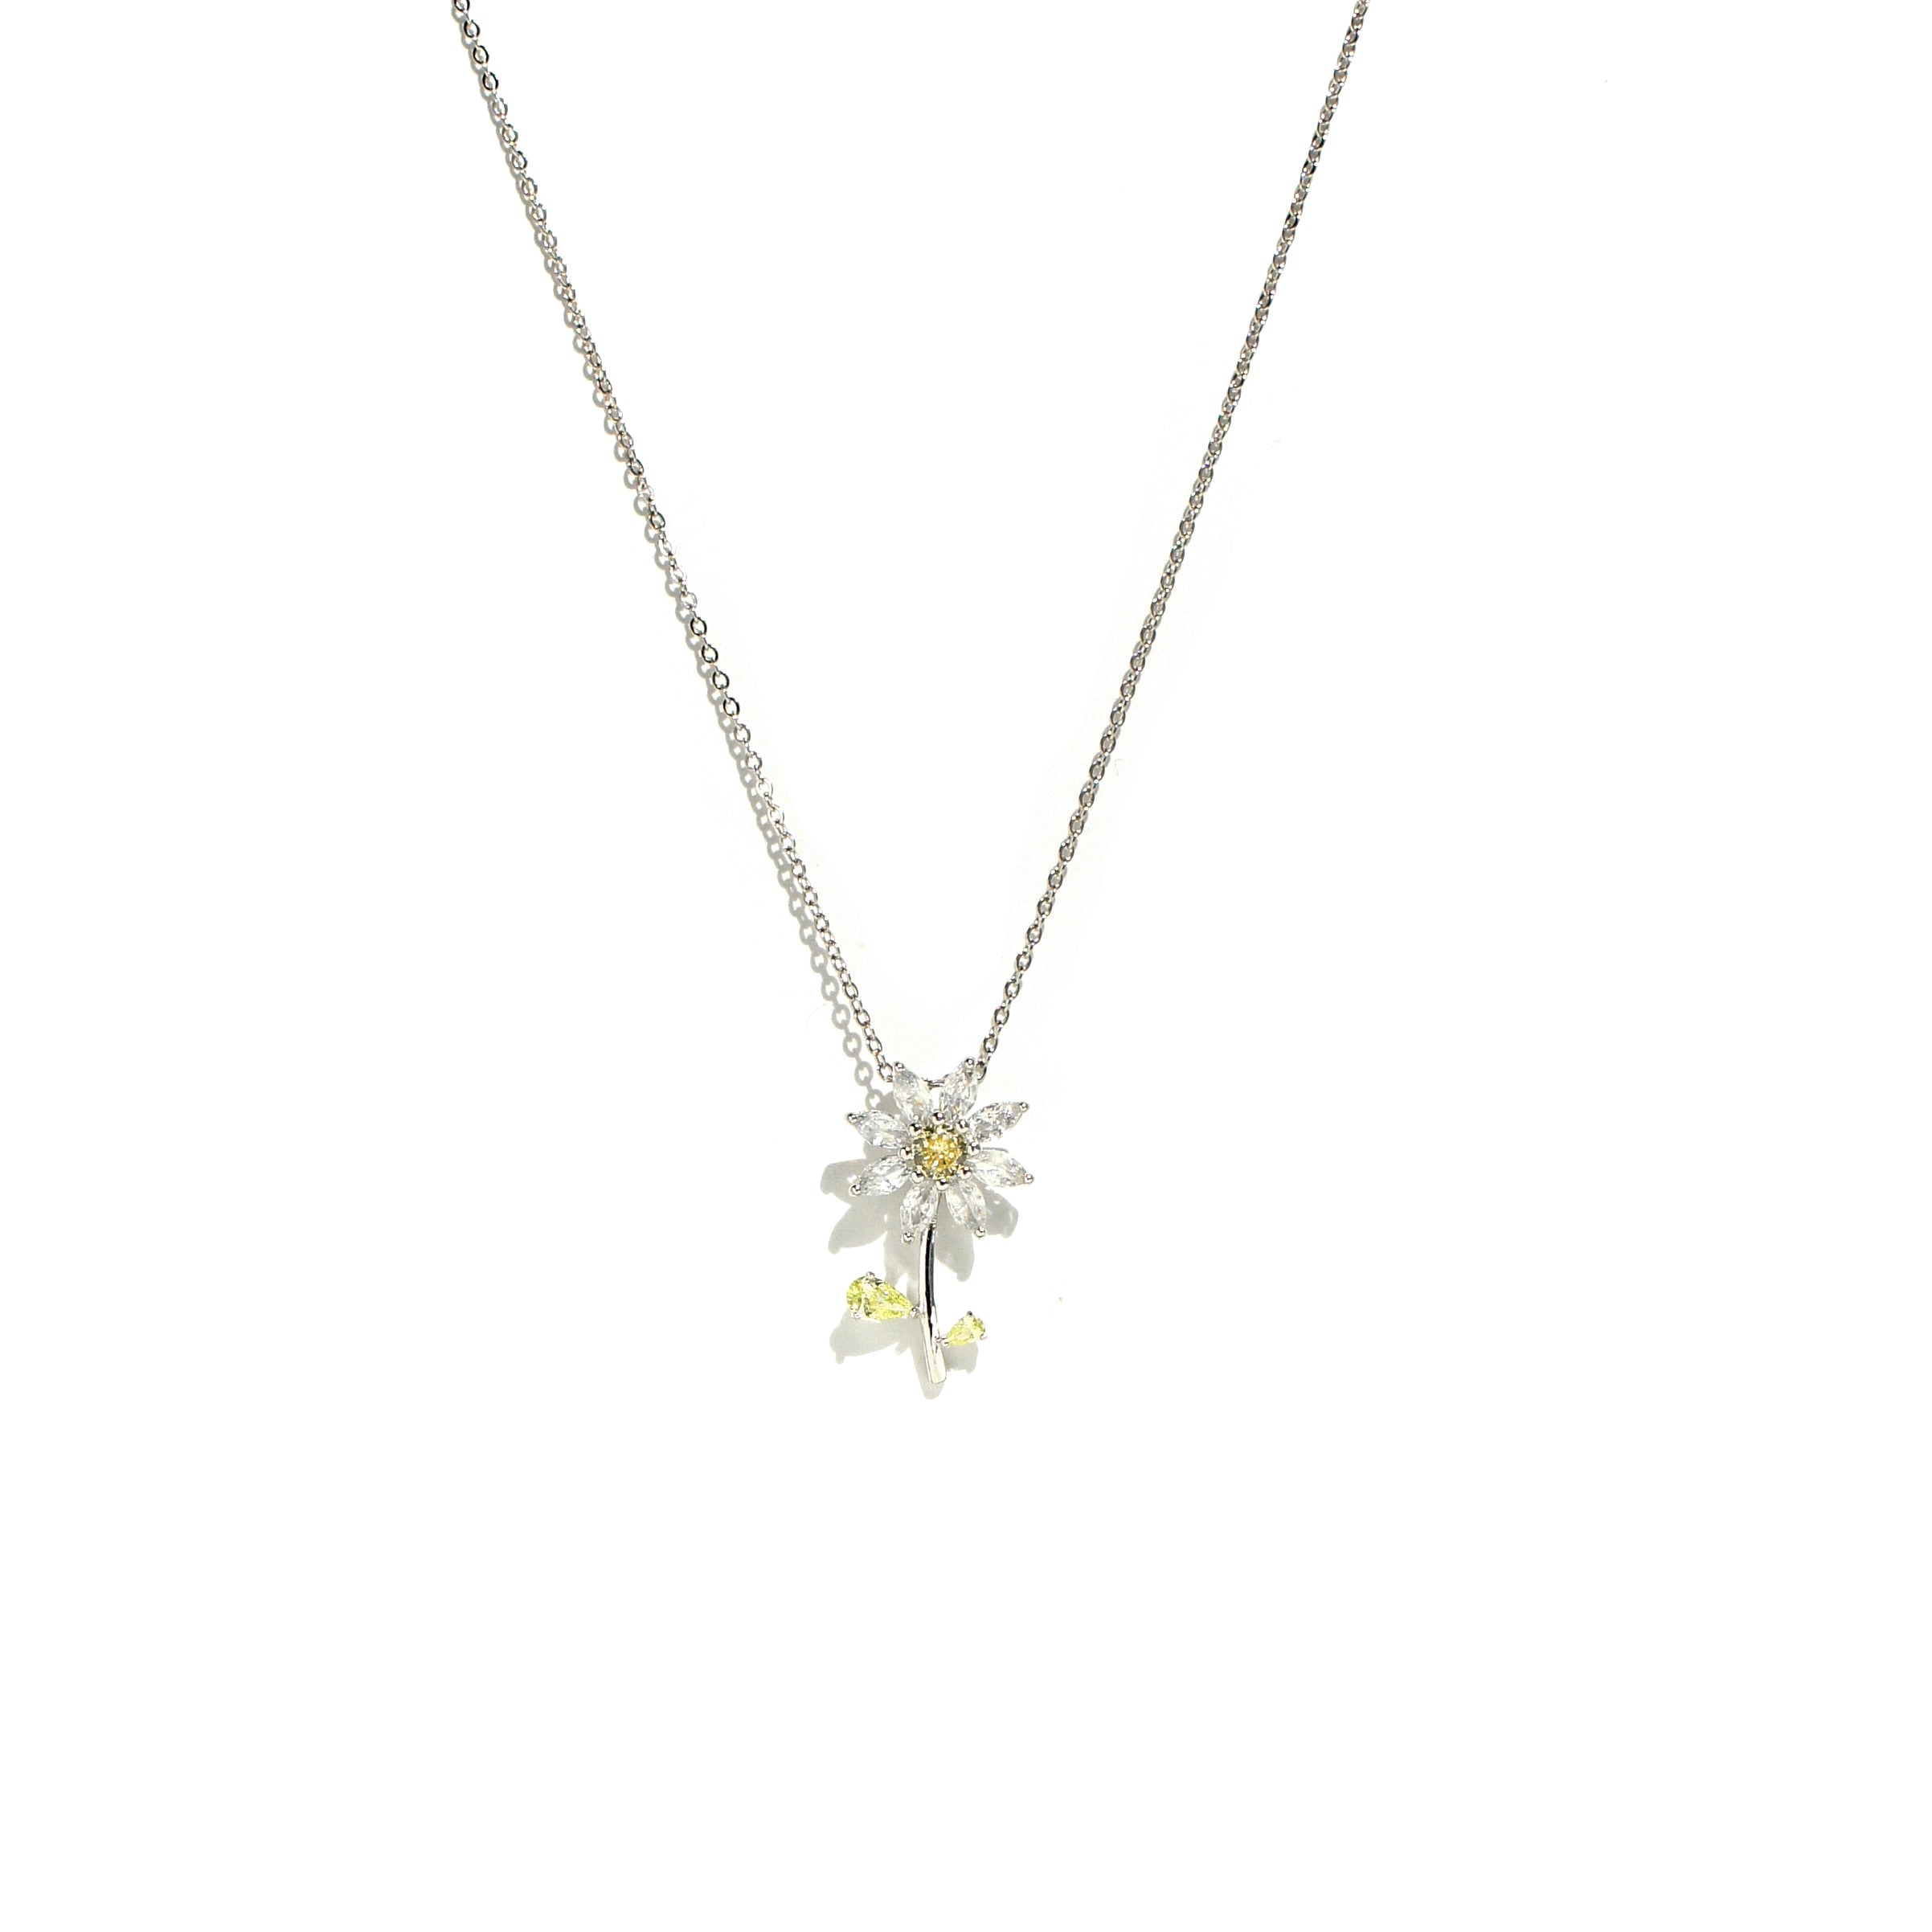 Reborn Crystal Daisy Pendant Necklace, Sterling Silver